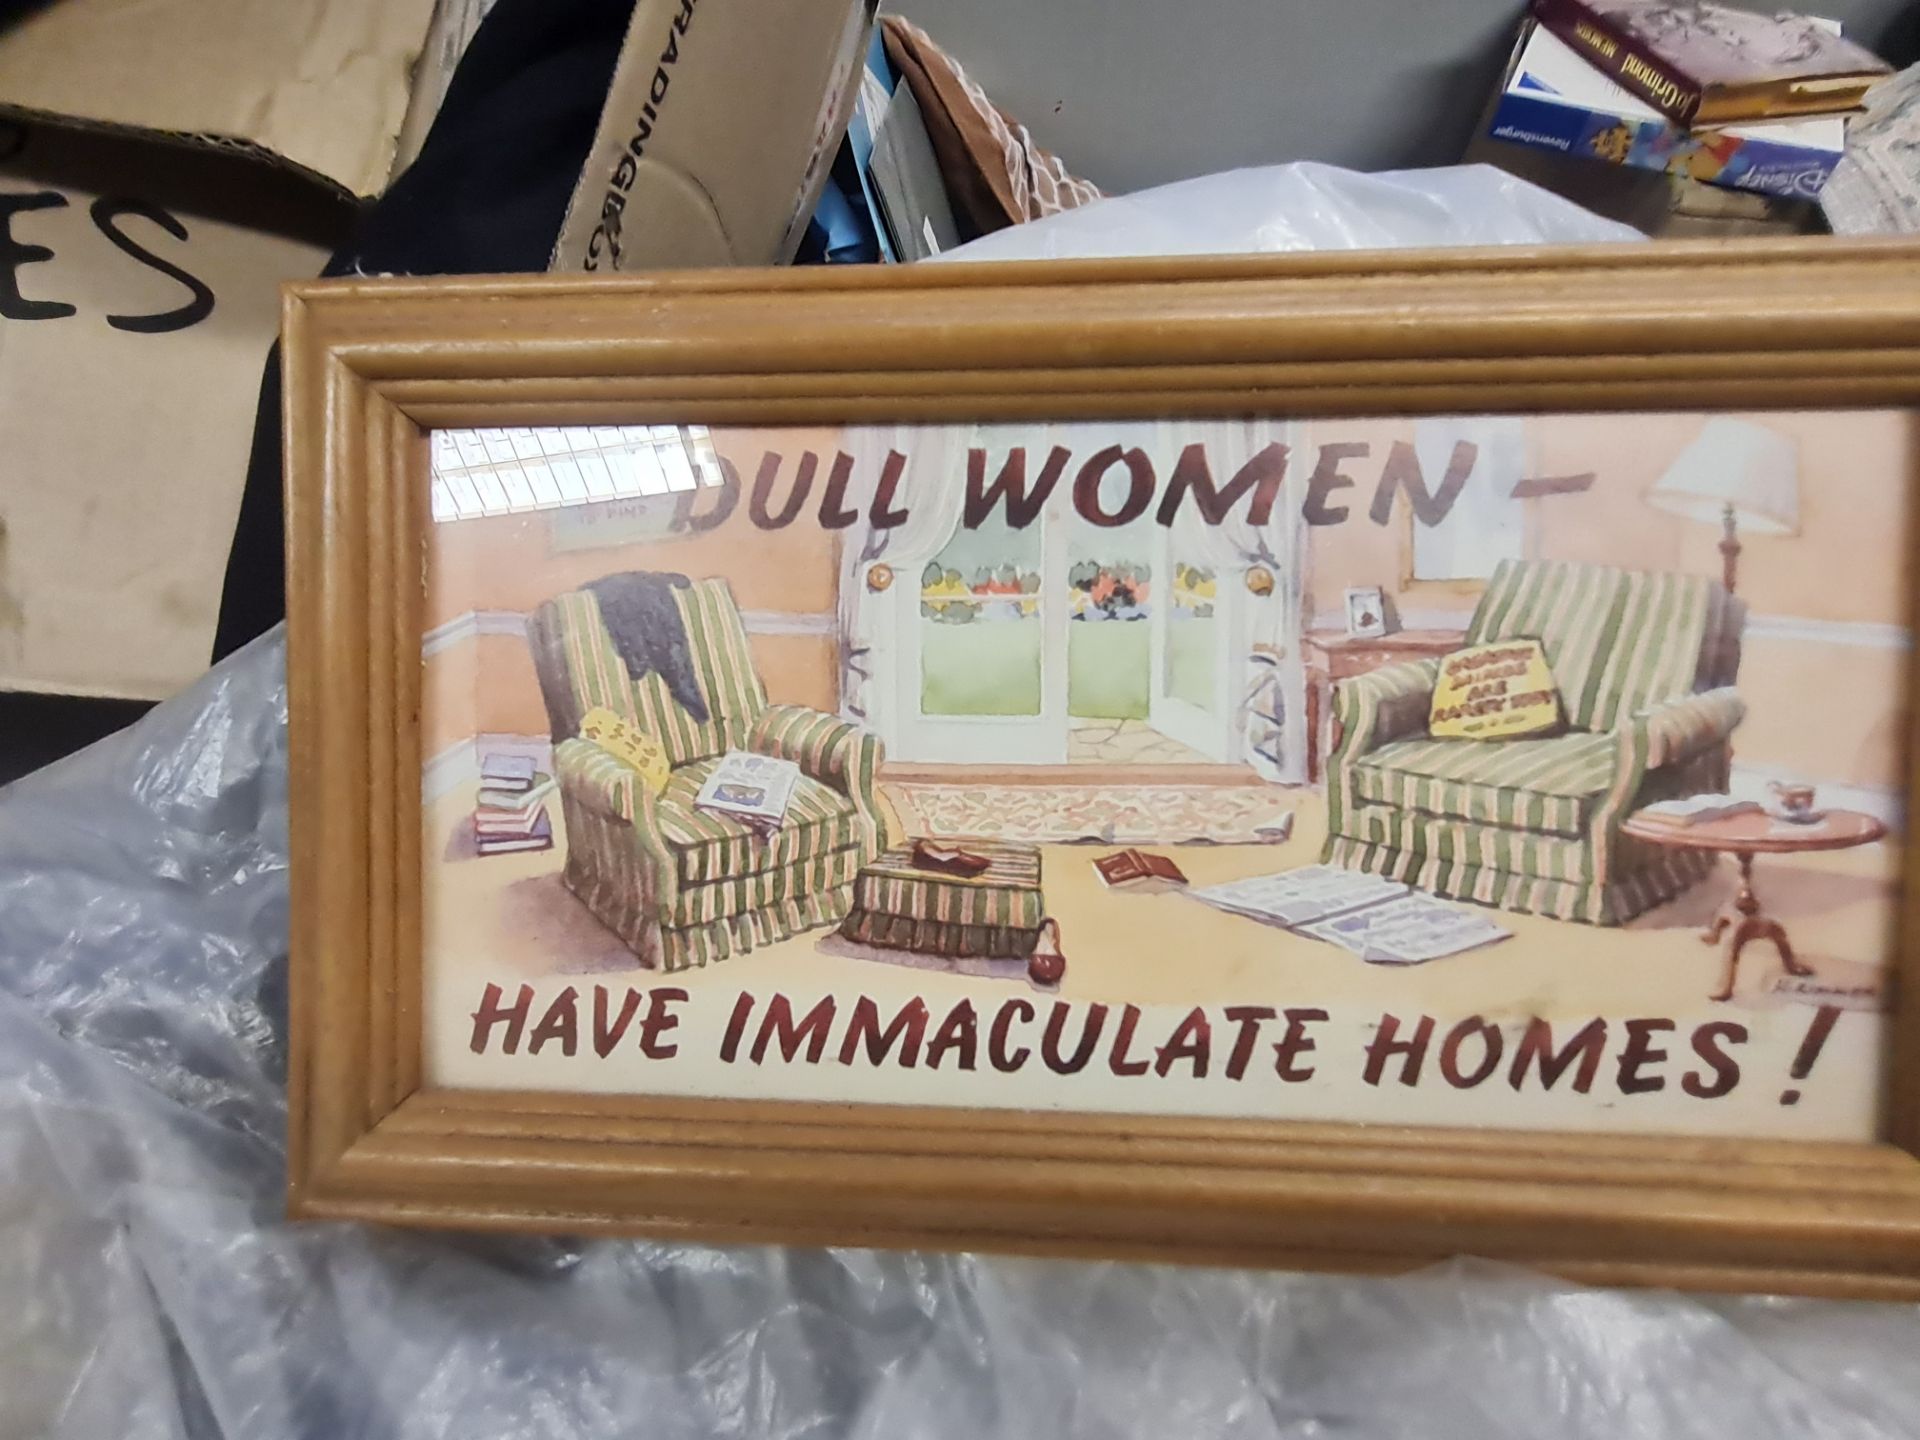 dull woman sign